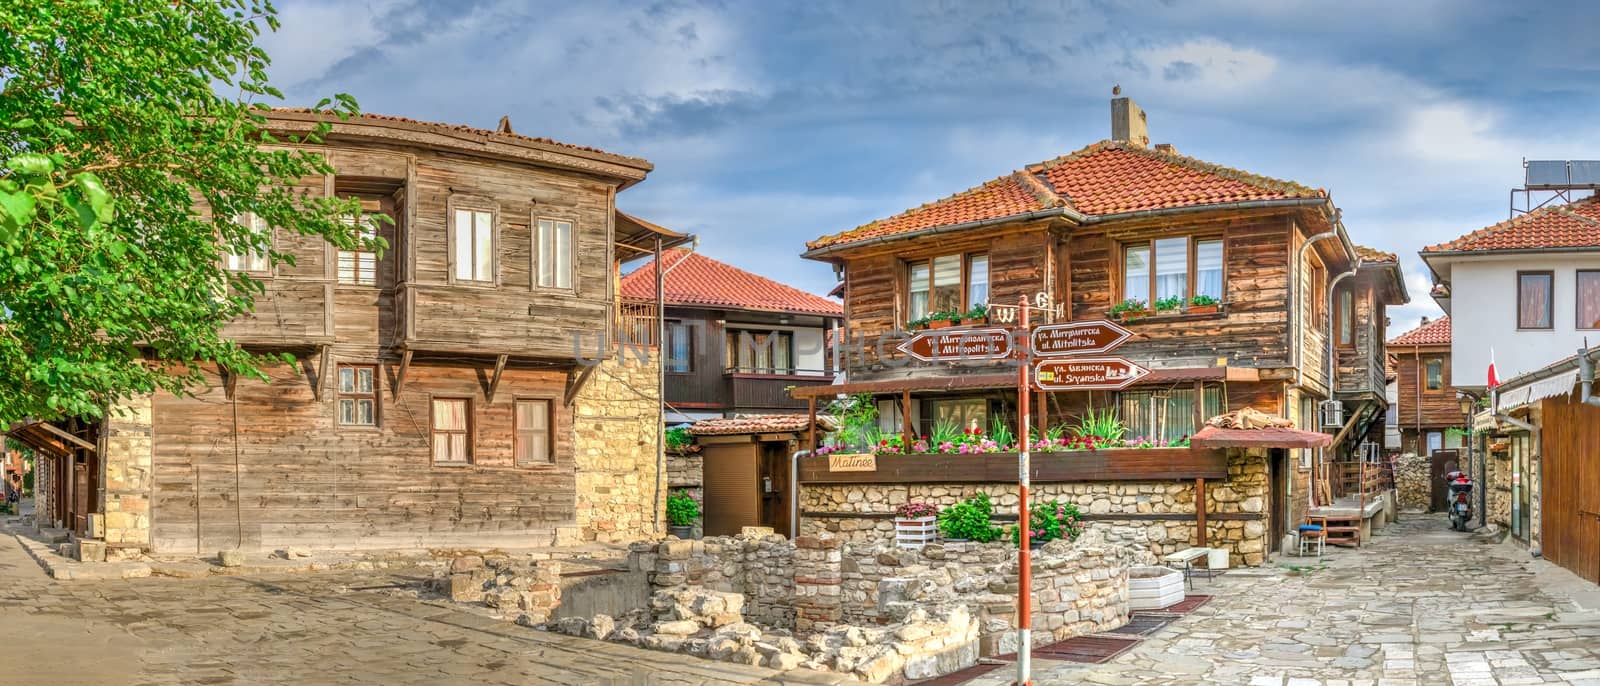 Streets of the old town of Nessebar, Bulgaria by Multipedia